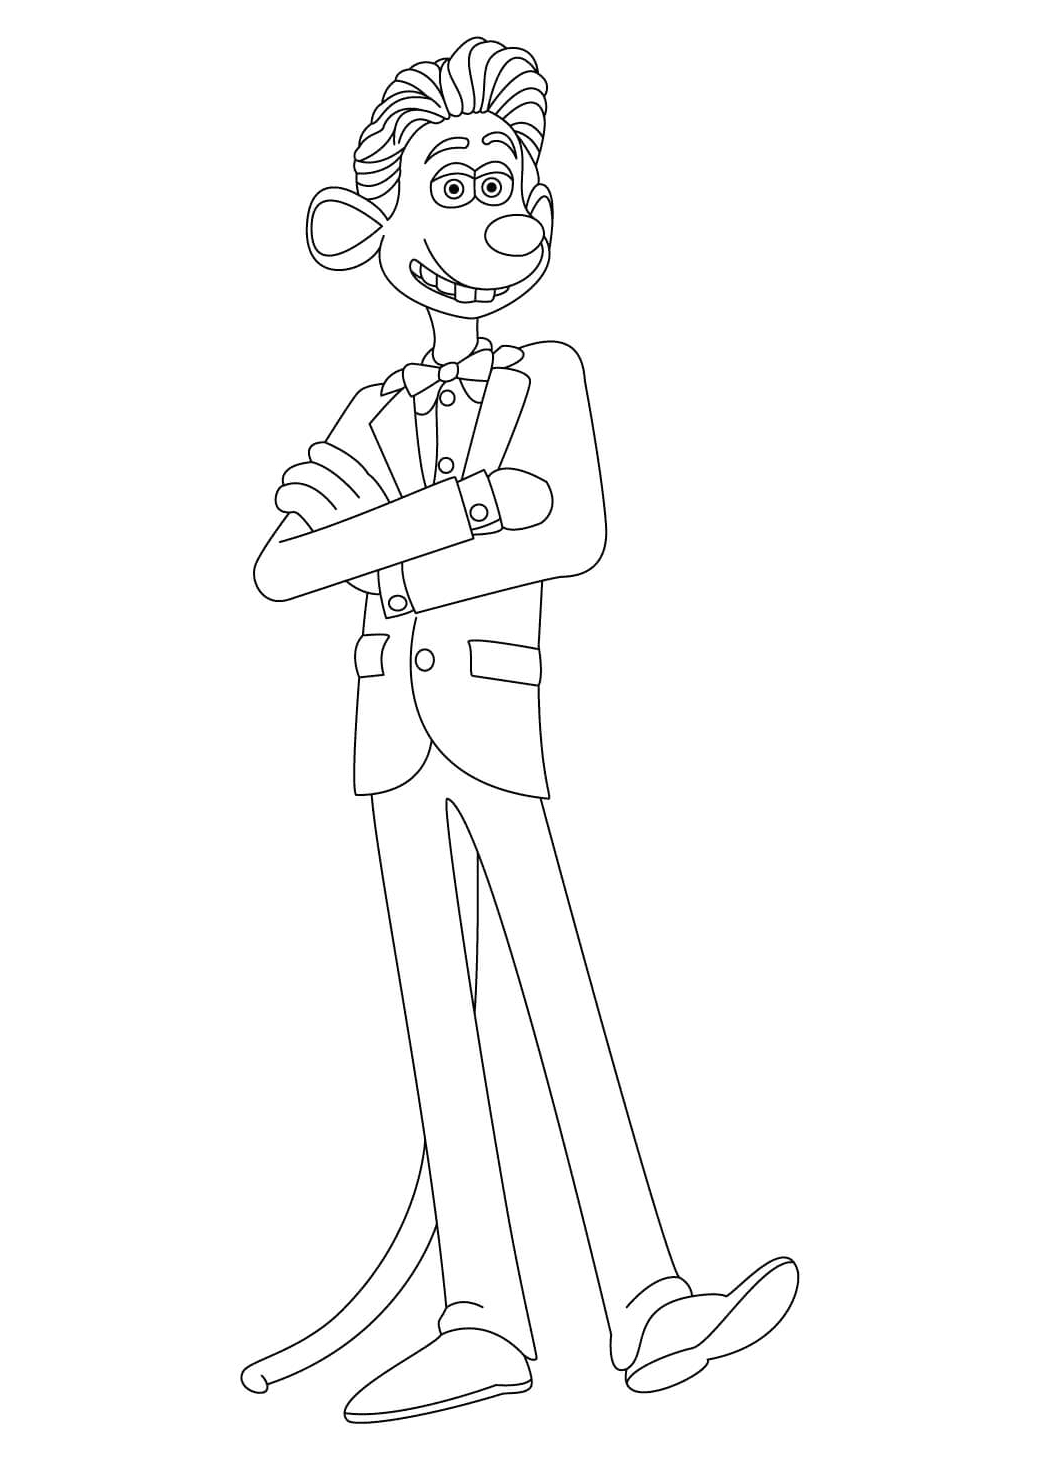 Roddy from Flushed Away Coloring Page